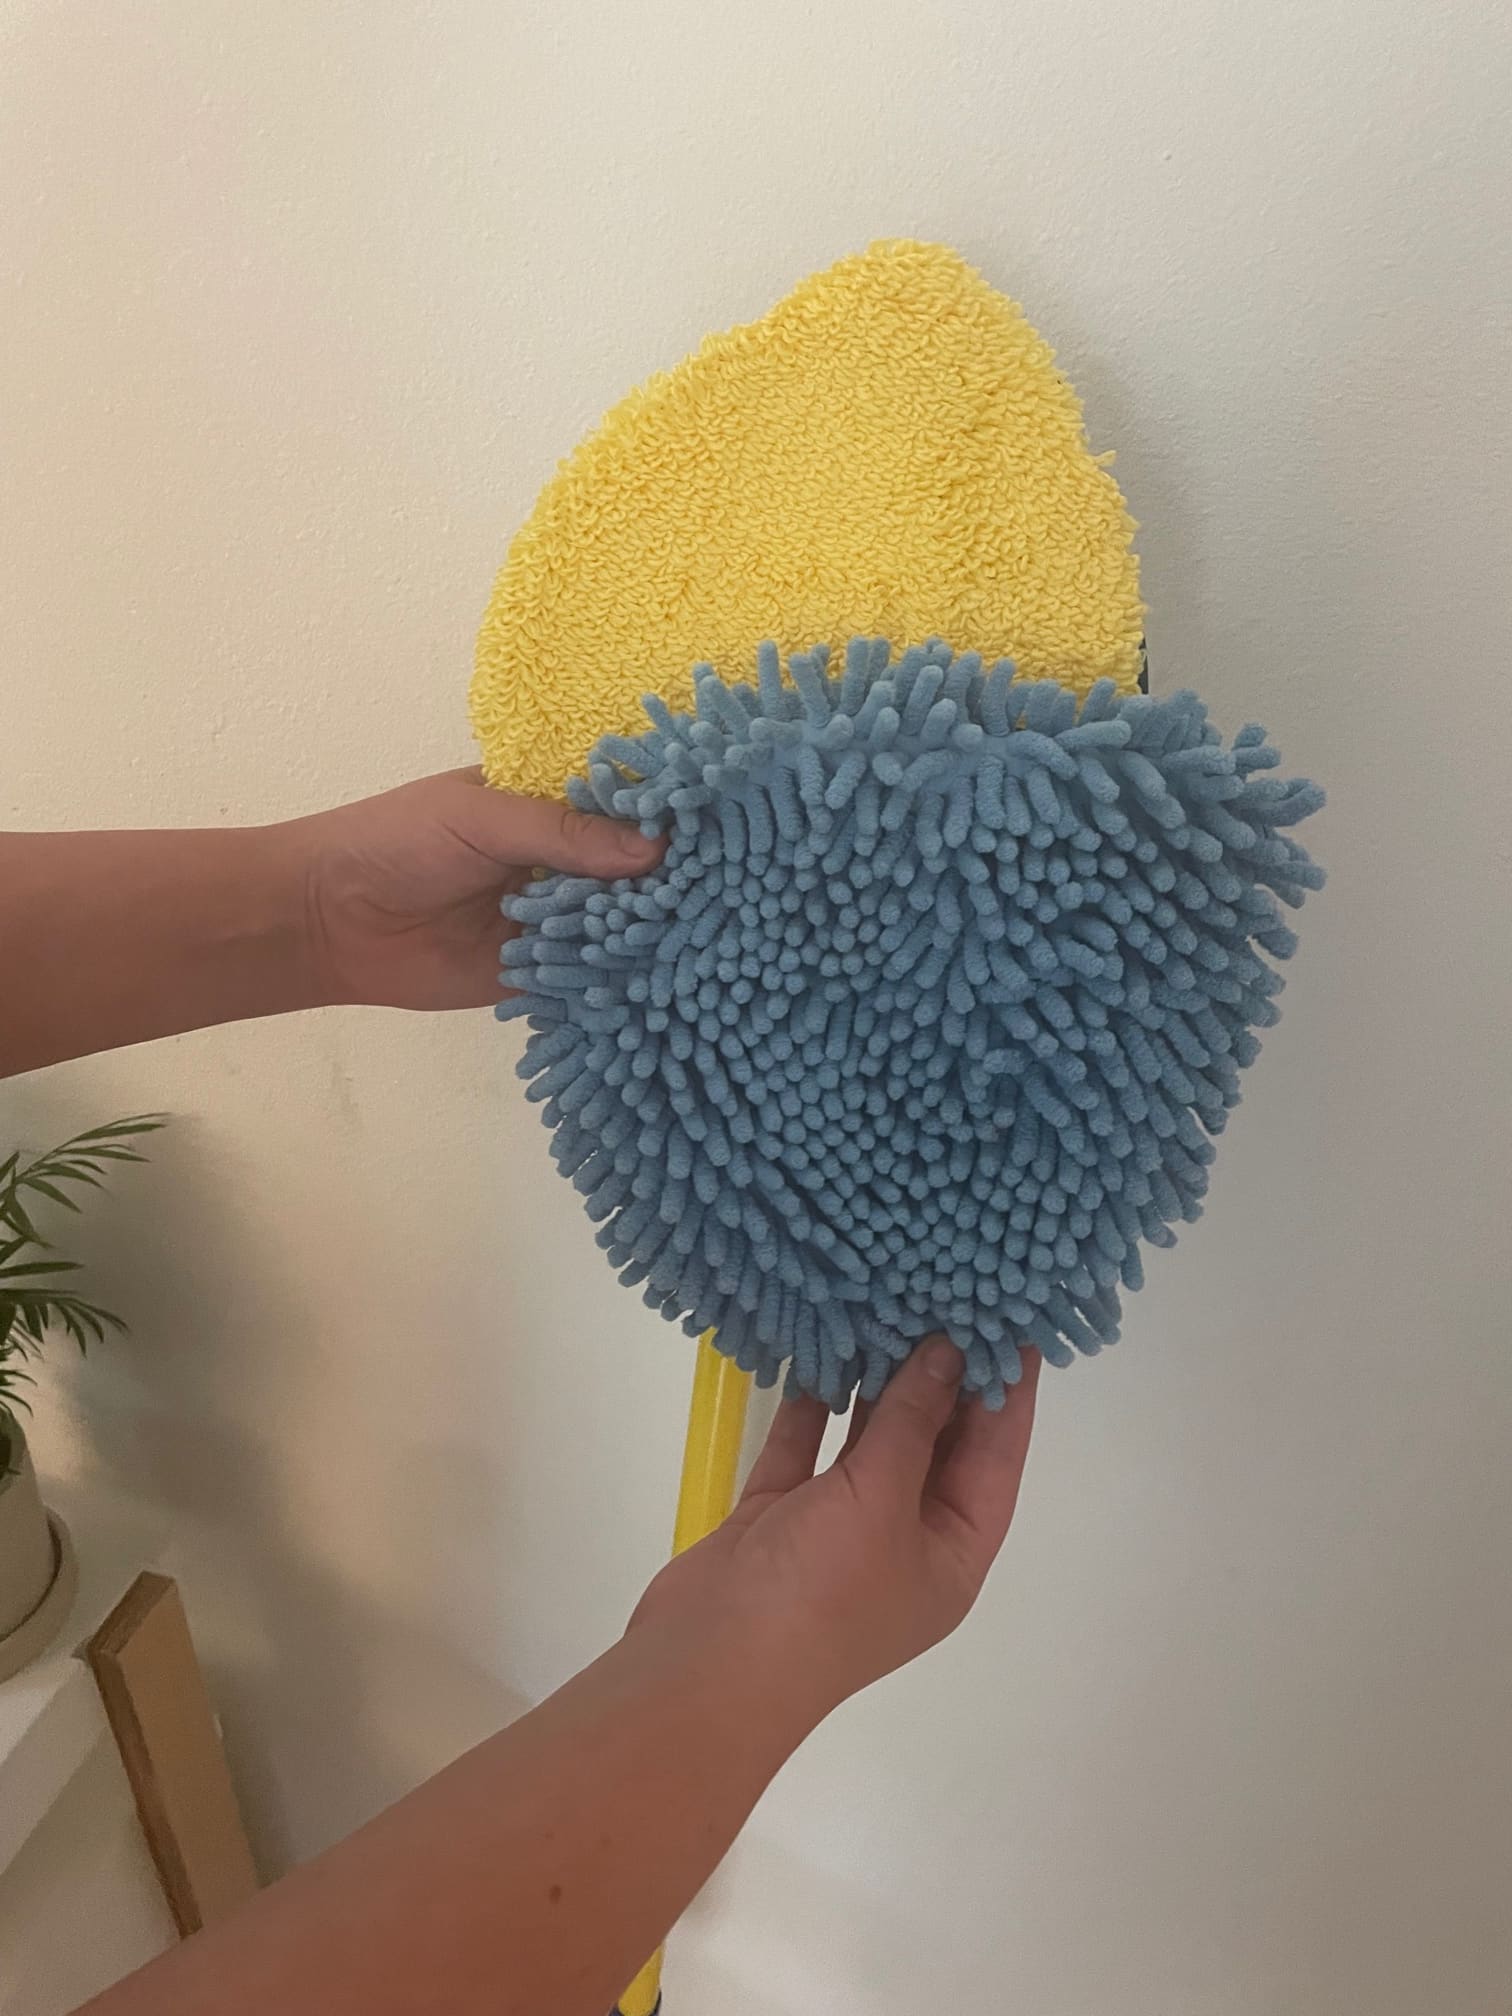 The TikTok Viral Chomp Wall Mop Review for 2023